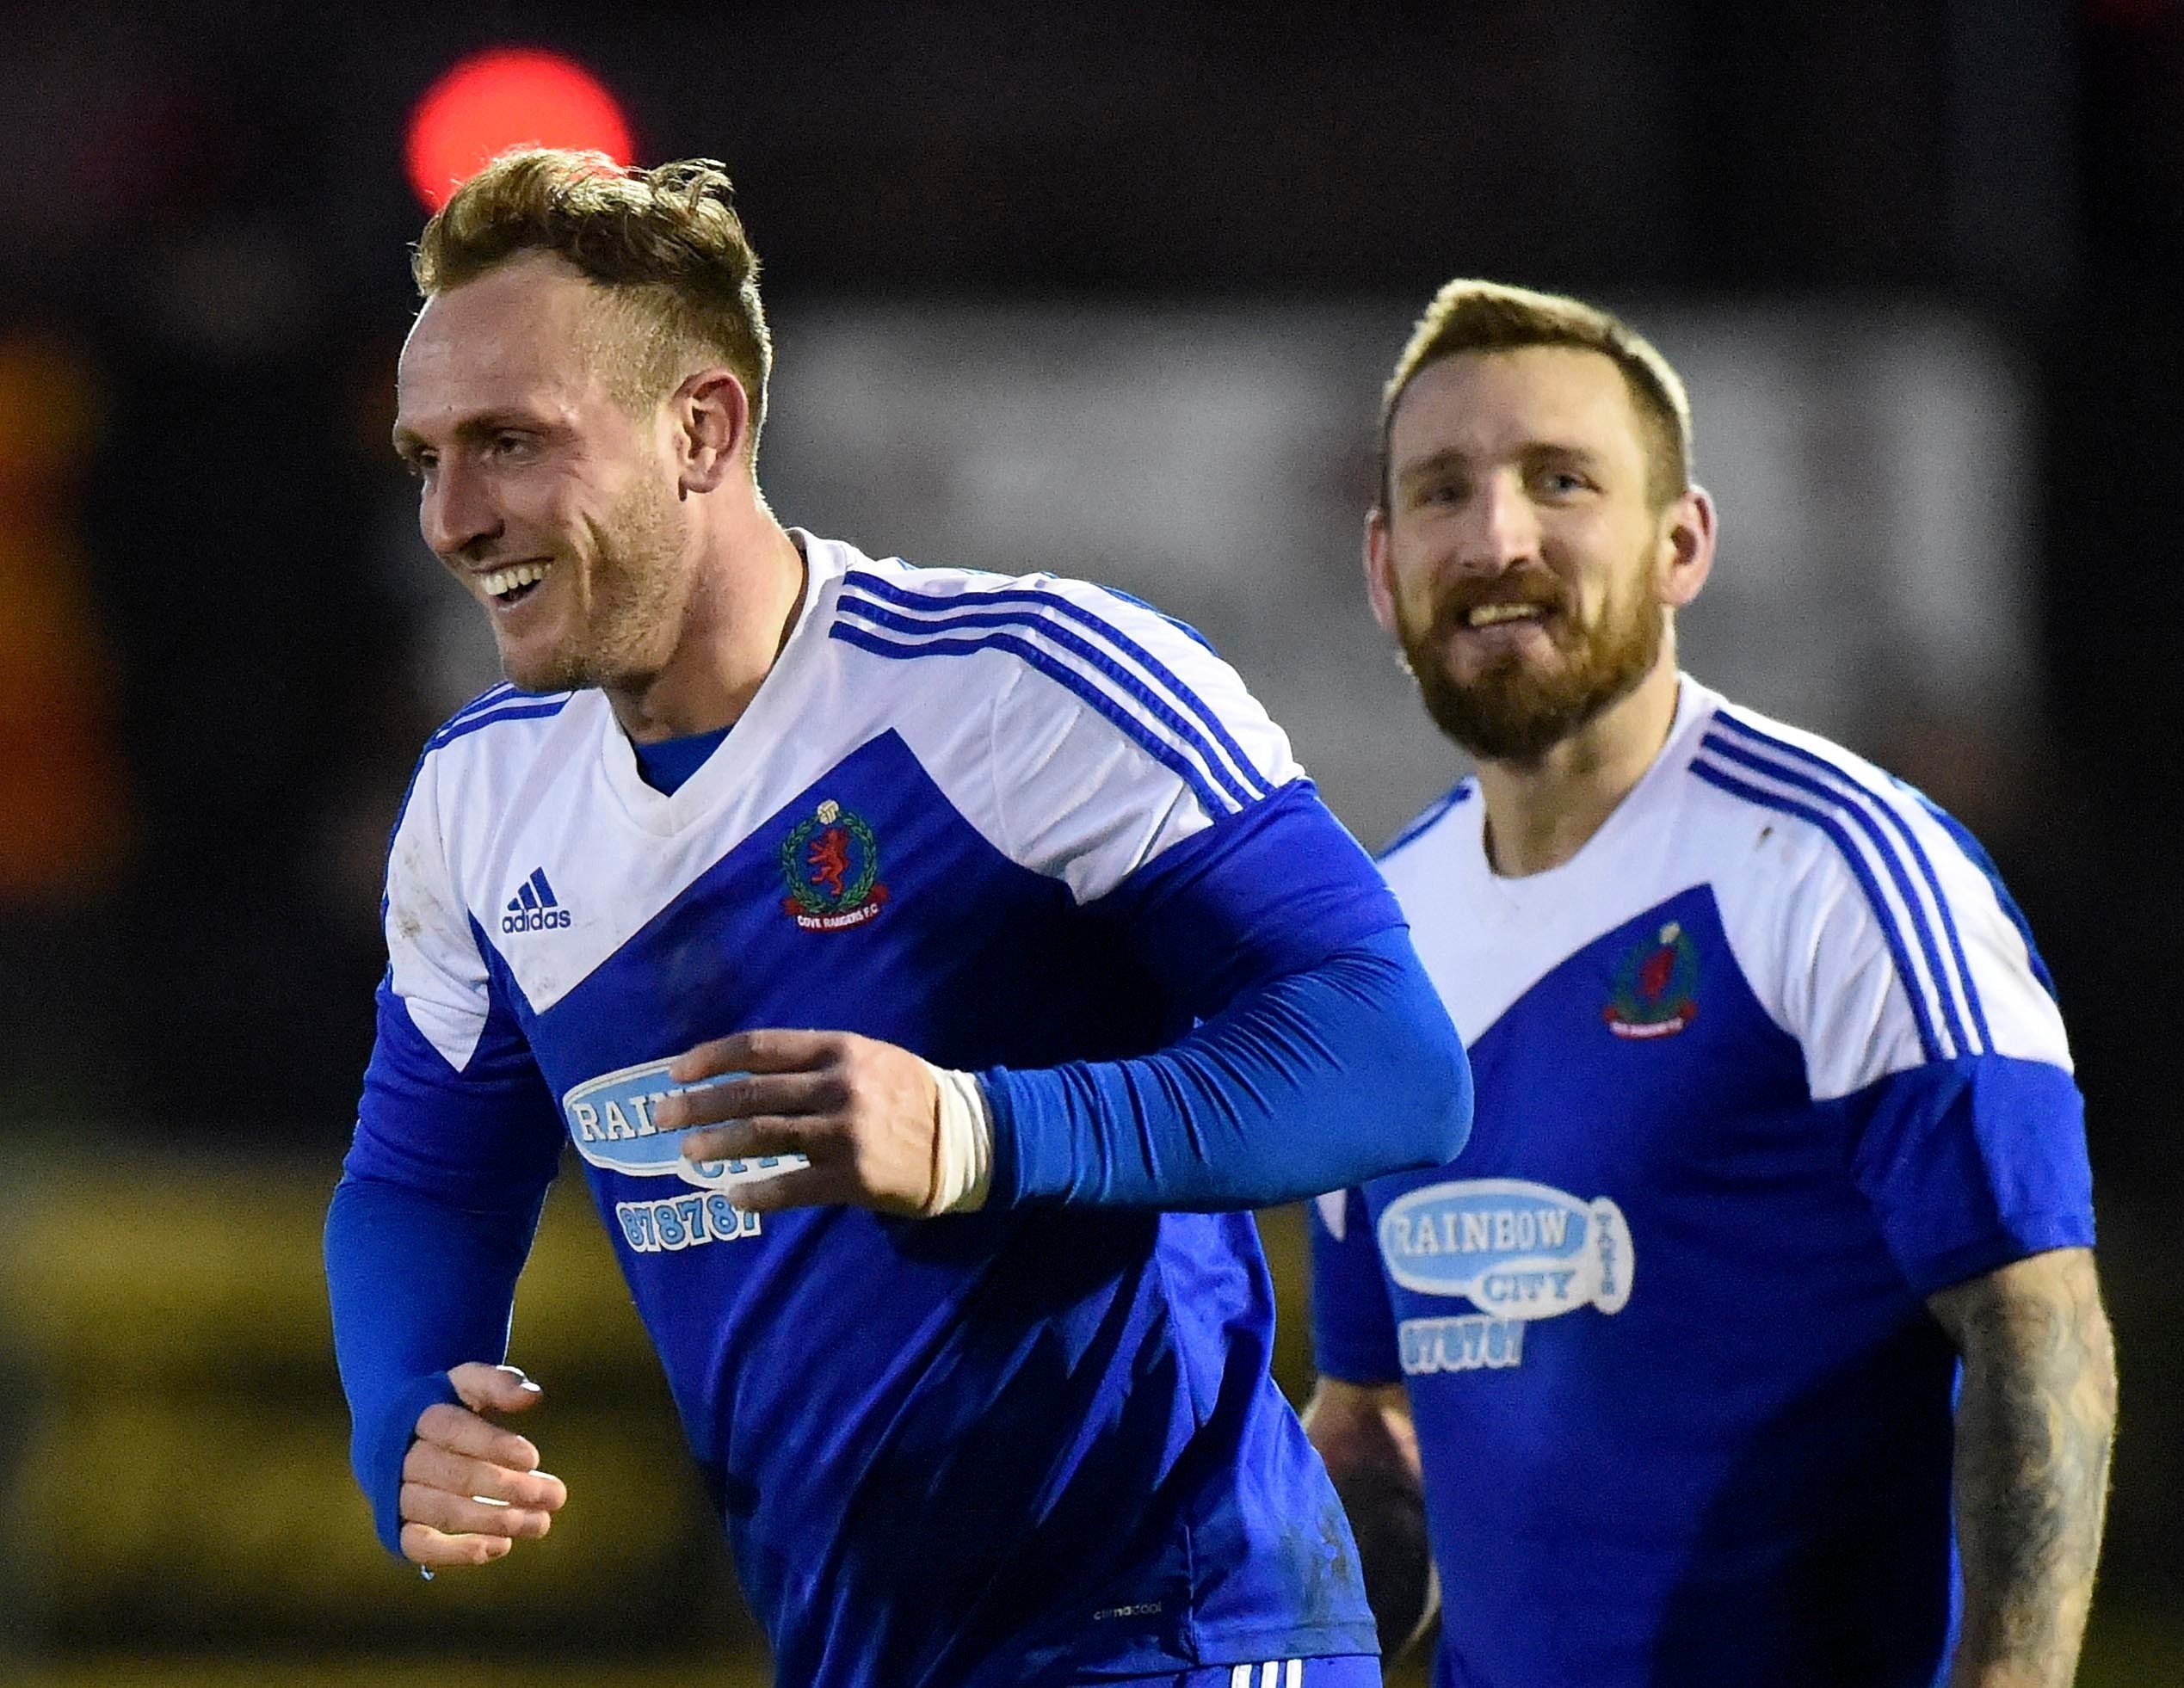 Jonny Smith has opted to leave Cove Rangers.